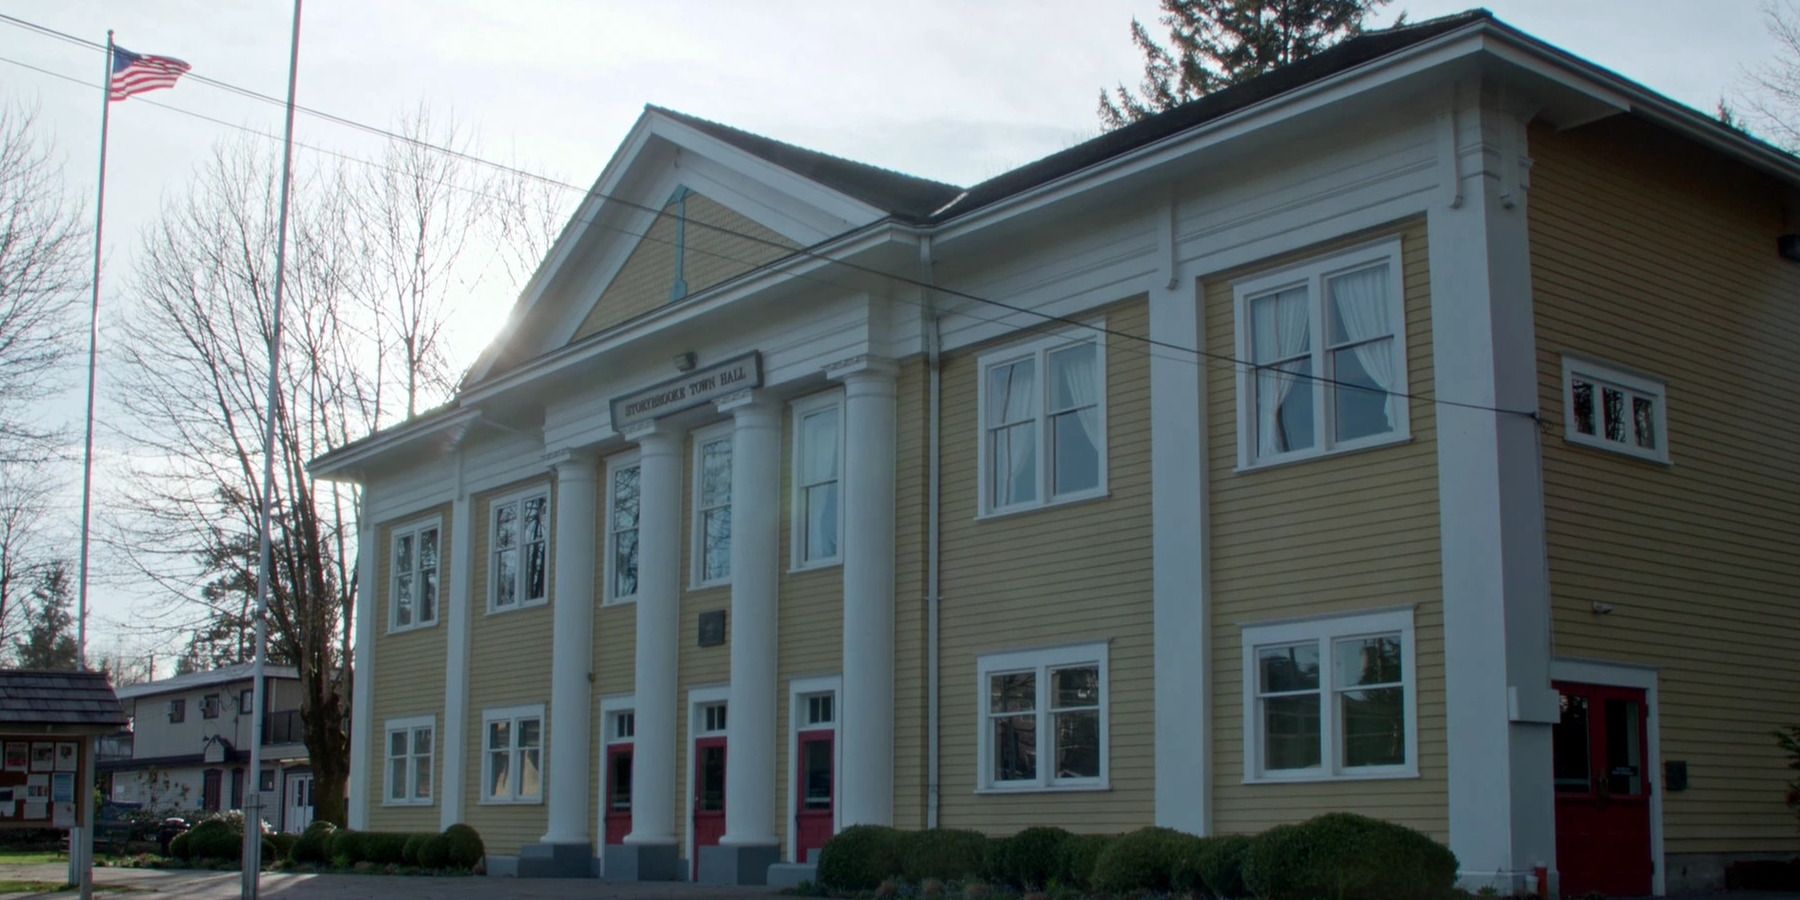 Storybrooke Town Hall In Once Upon A Time.jpg